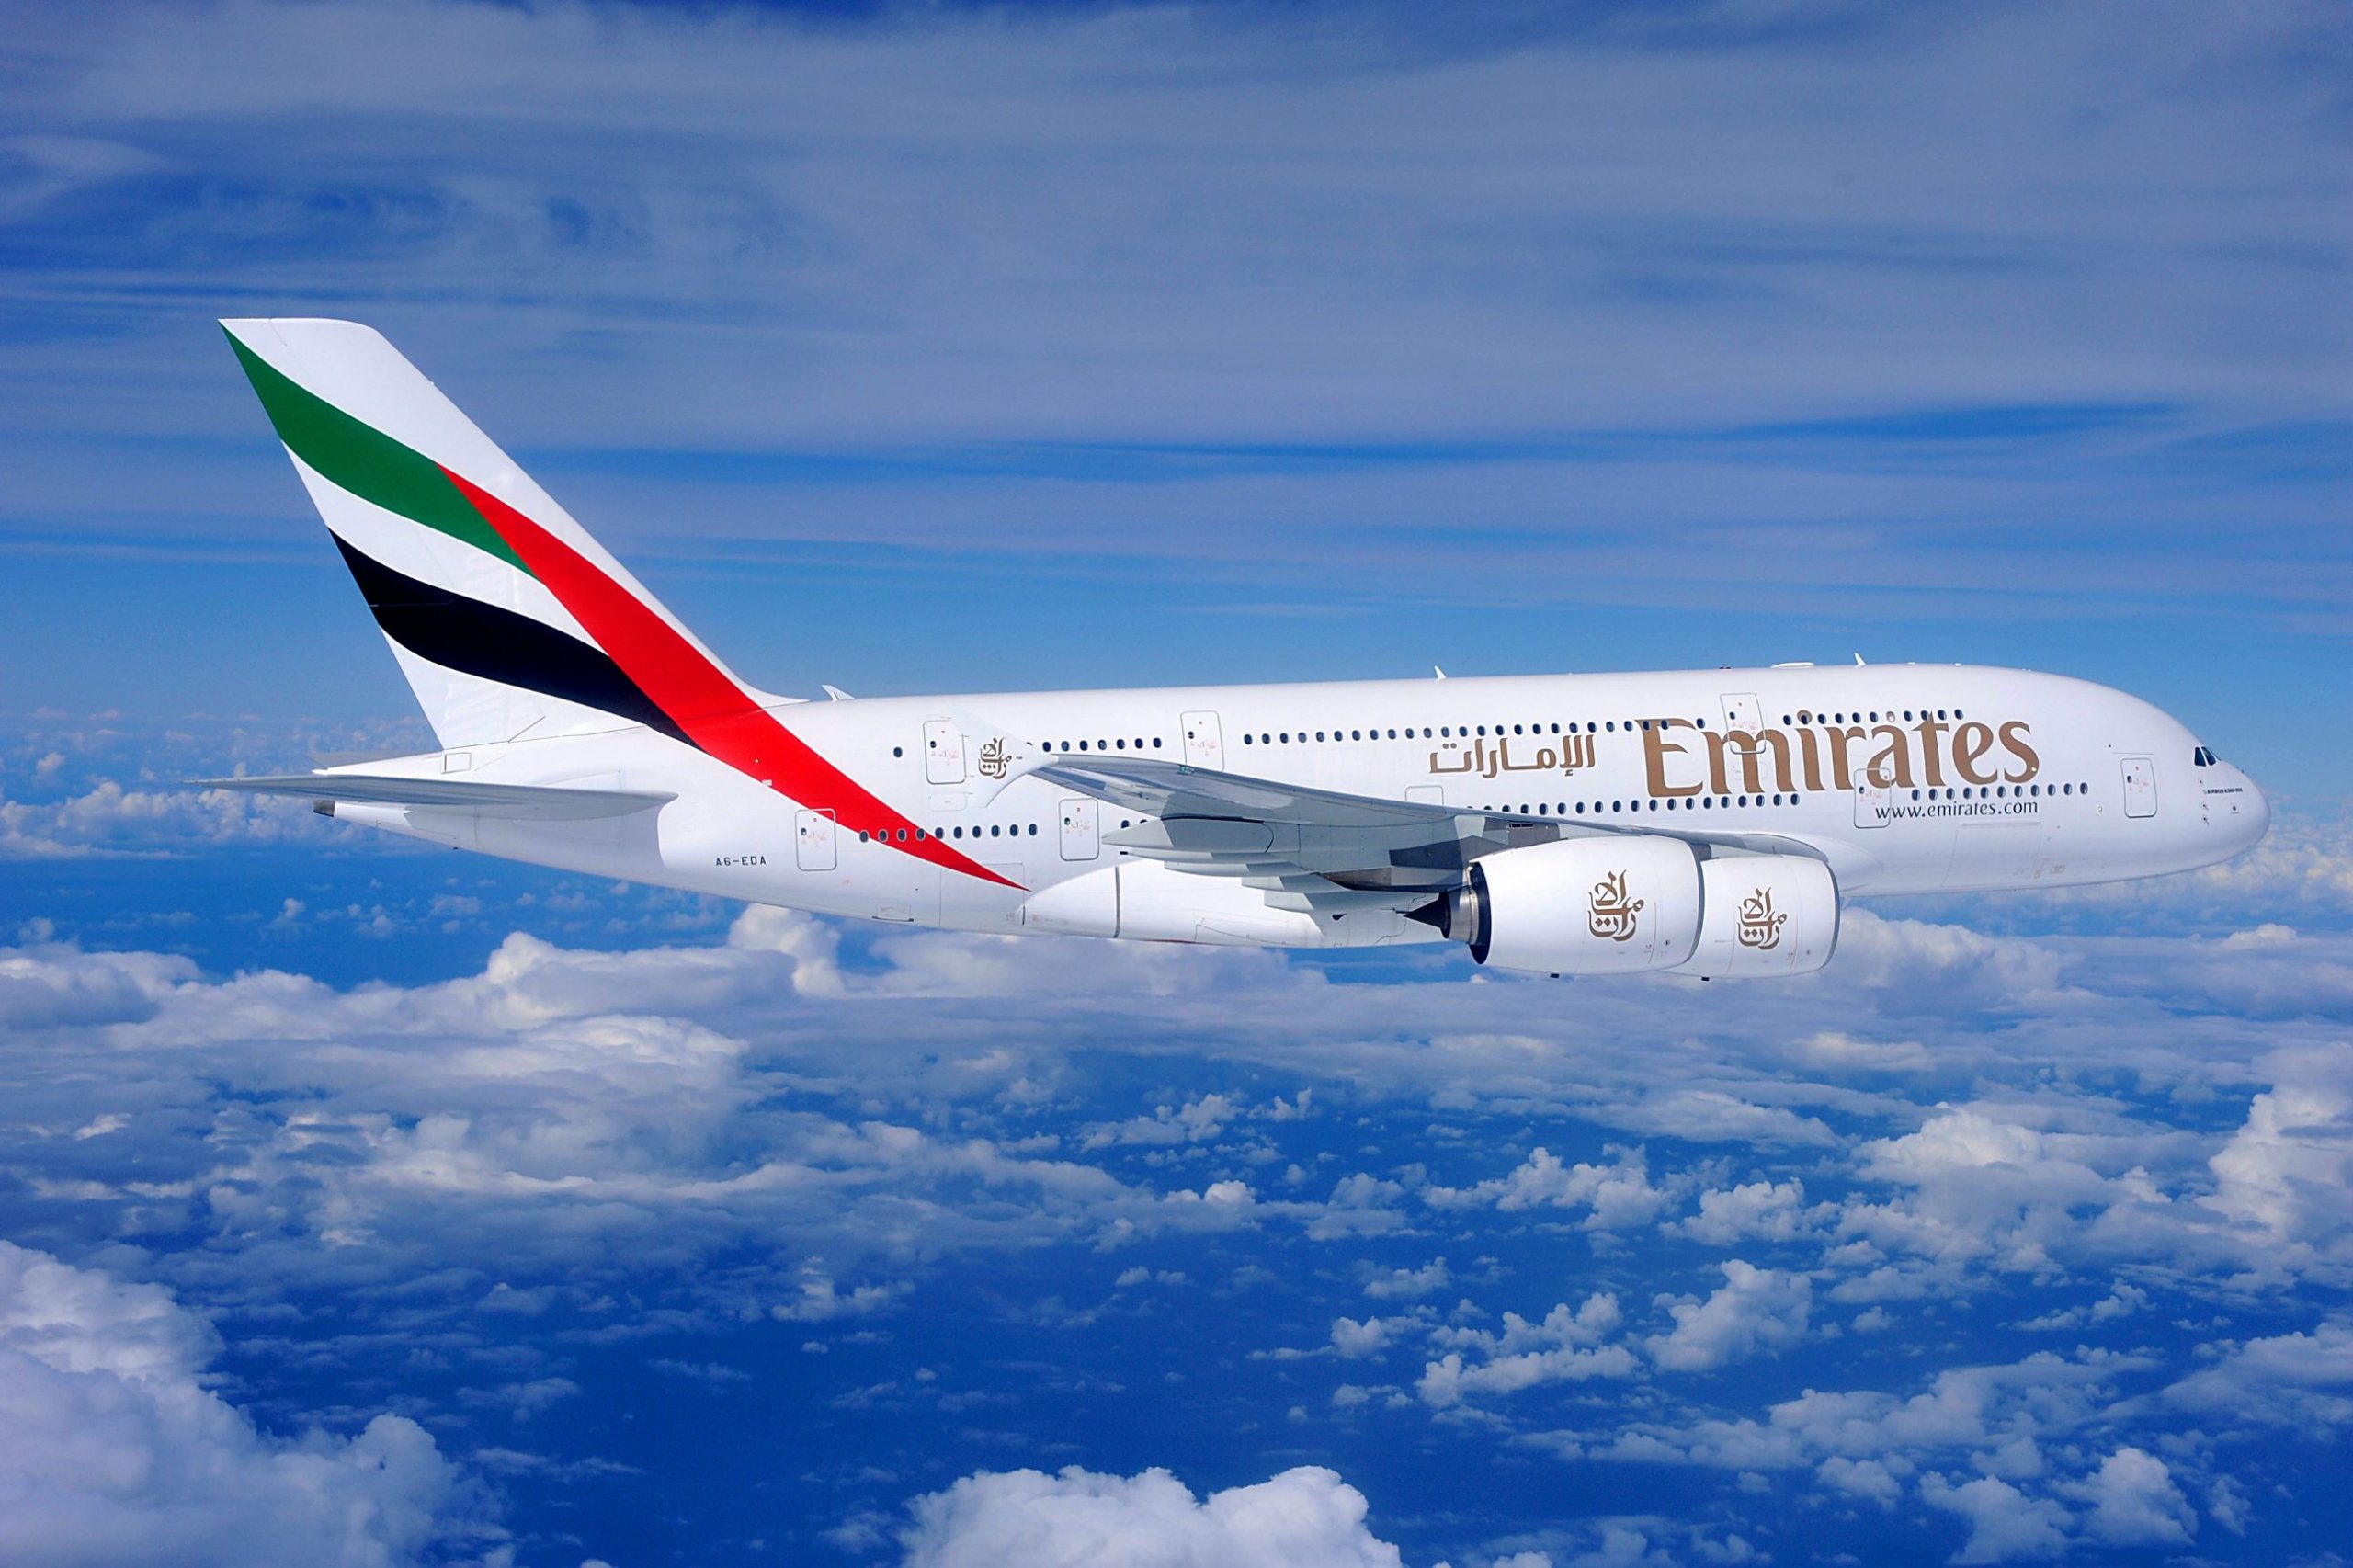 Fly Emirates – fly better